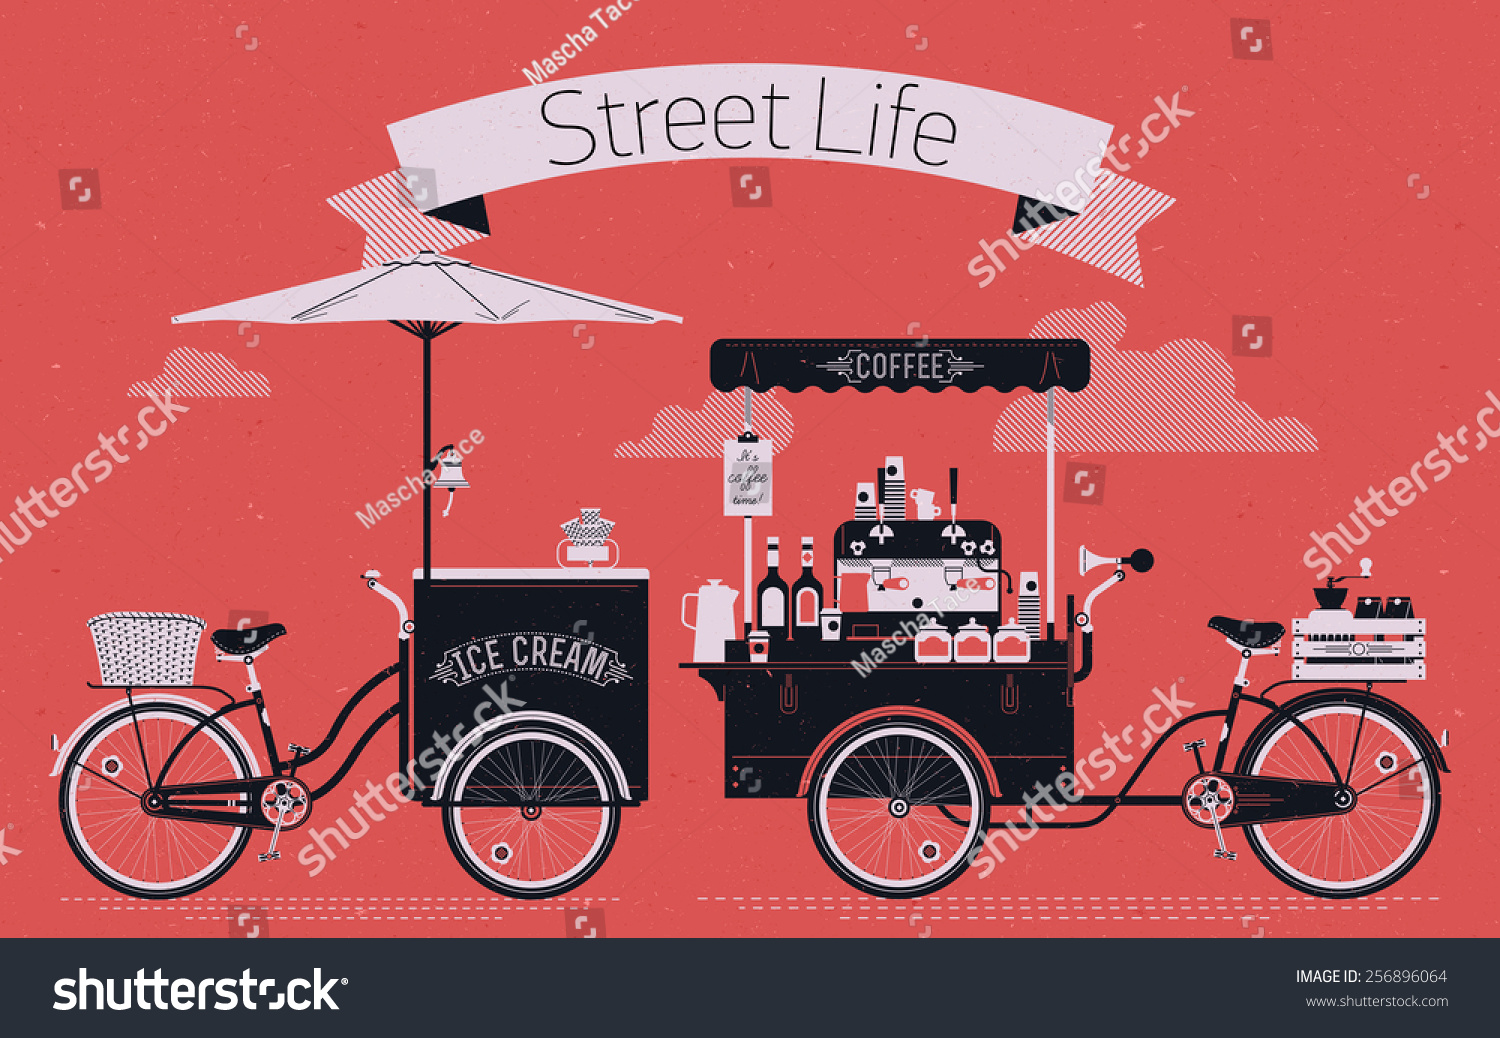 SVG of Creative vector detailed graphic design on street life with coffee and ice cream vending bicycle carts with espresso machine, sirup bottles, disposable cups and more. Subtle rough paper texture svg